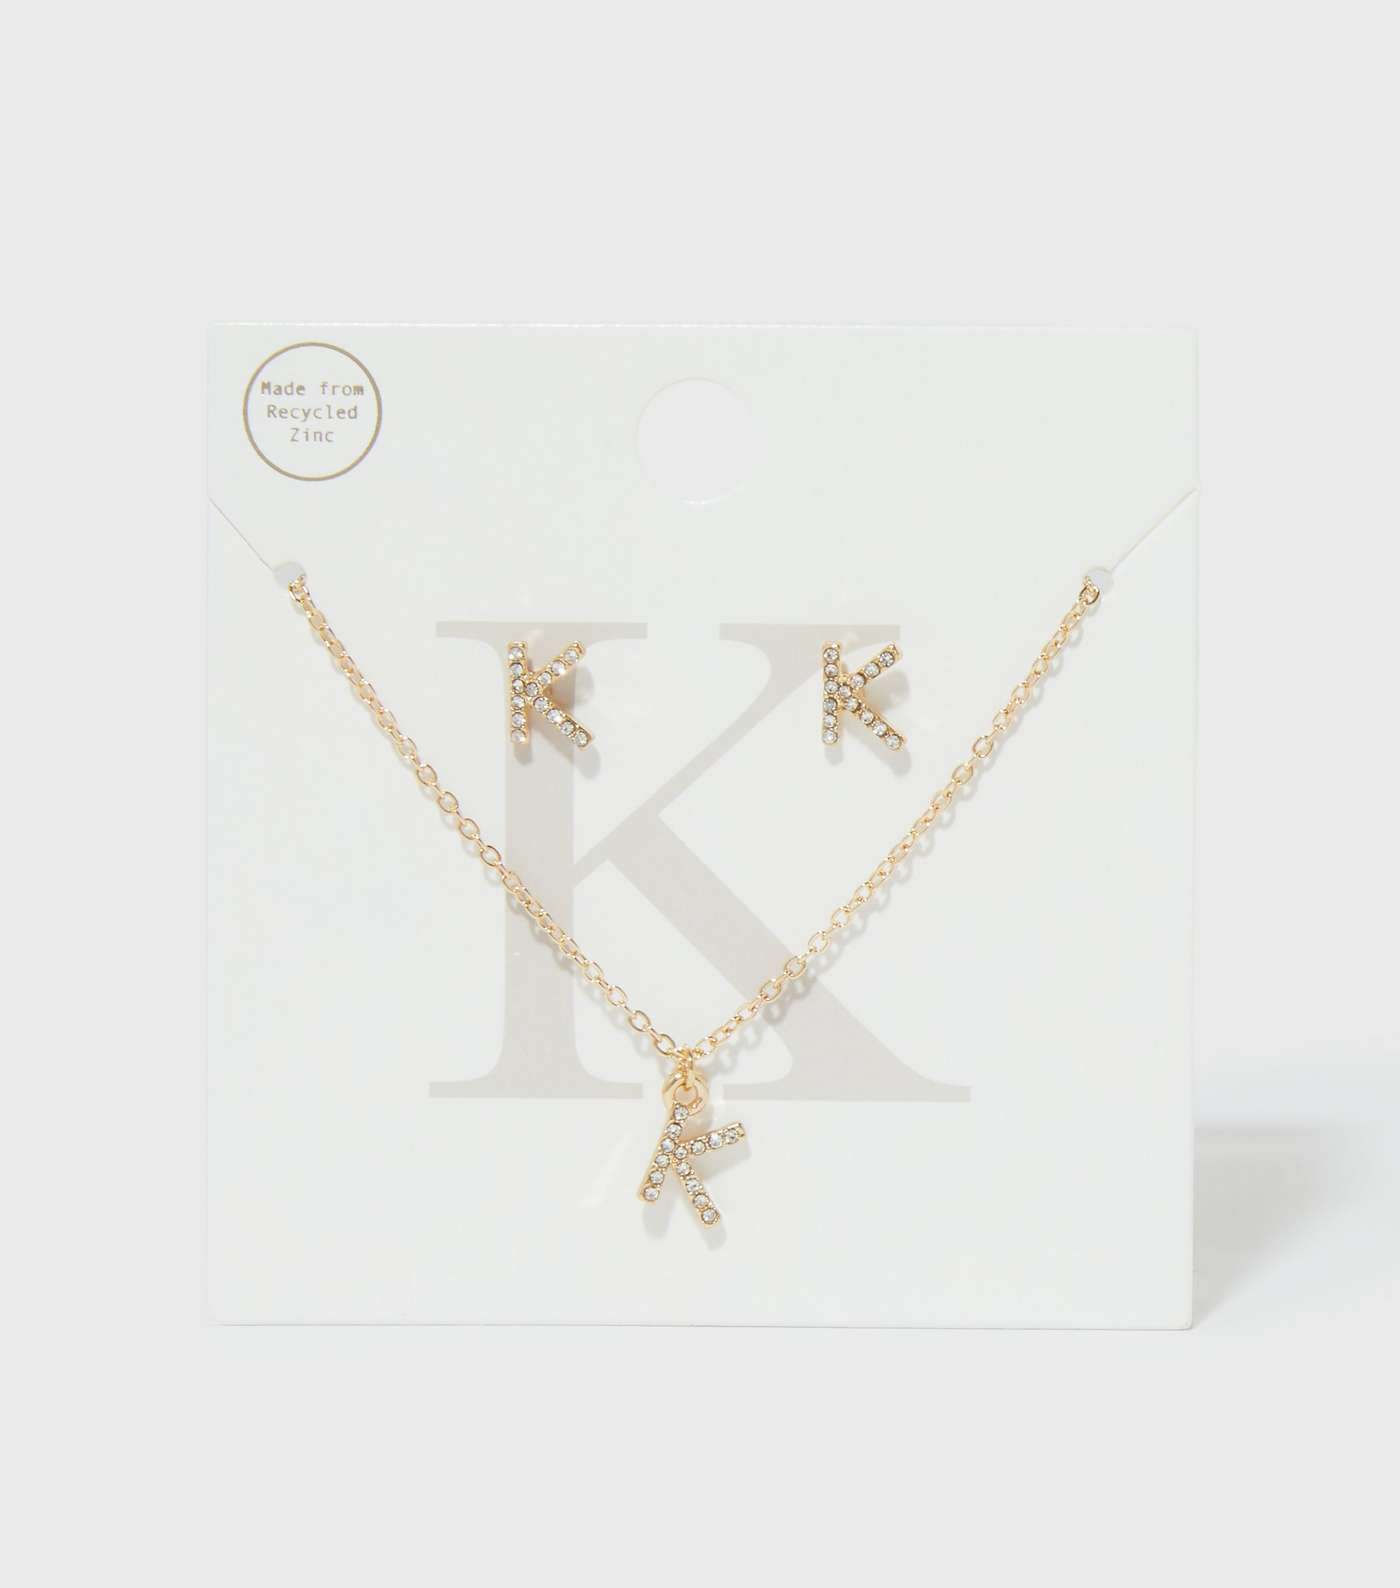 Gold K Initial Earrings and Necklace Gift Set